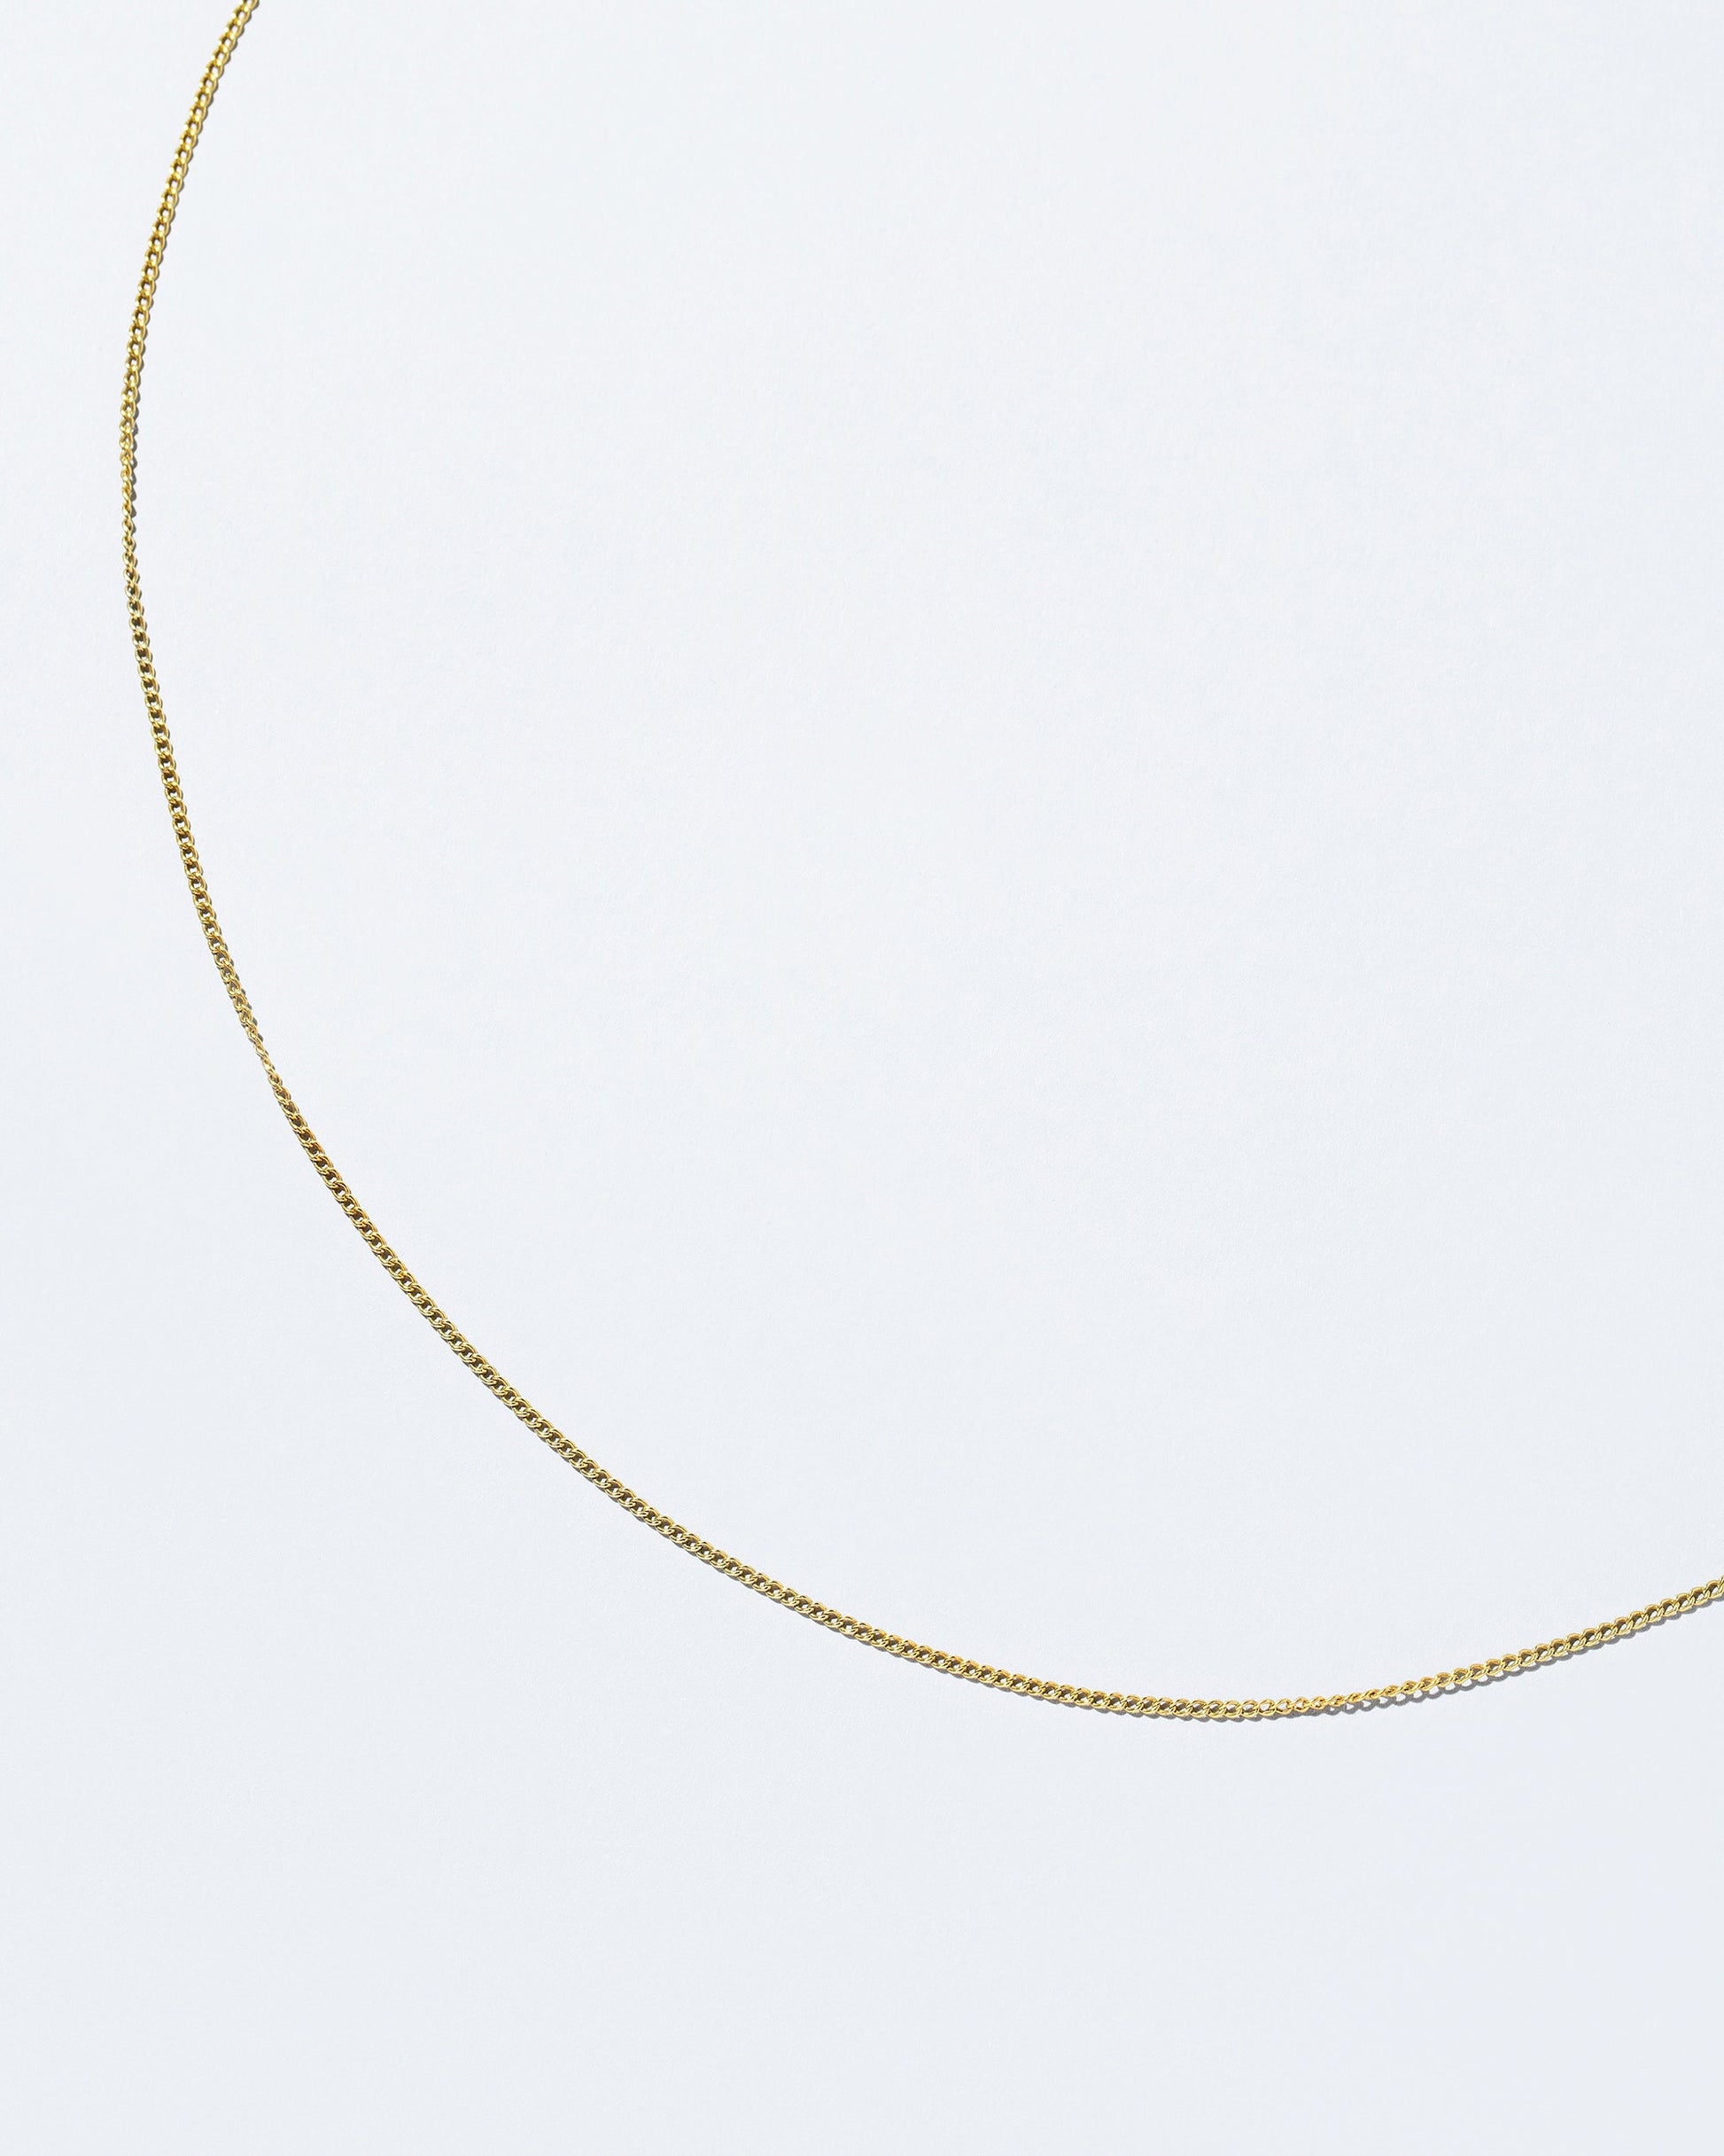  Petite Curb Chain Necklace on light color background.